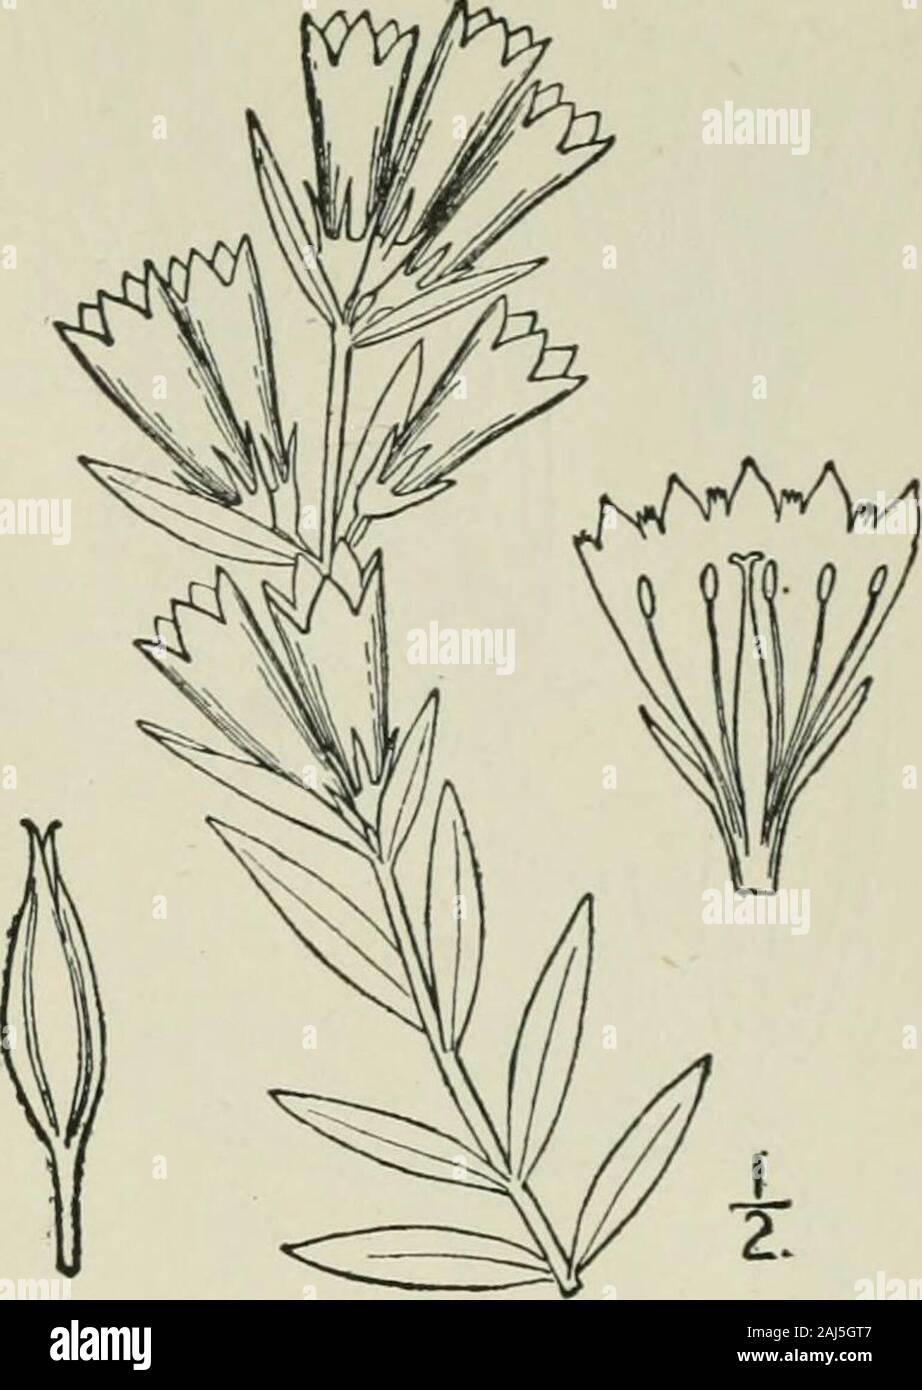 An illustrated flora of the northern United States, Canada and the British possessions : from Newfoundland to the parallel of the southern boundary of Virginia and from the Atlantic Ocean westward to the 102nd meridian . Gentiana affinis Griseb. in Hook. Fl. Bor. Am. 2 : 56, 1834.D. affinis Rydb. Bull. Torr. Club 33: 149. 1906. Perennial; stems clustered from deep roots, minutelypuberulent, simple, 6-i8 high. Leaves linear-oblongto lanceolate-oblong, obtuse or acutish, rounded ornarrowed at the base, firm, roughish-margined, indis-tinctly nerved, i-i¥ long, the floral smaller; flowersfew, nume Stock Photo